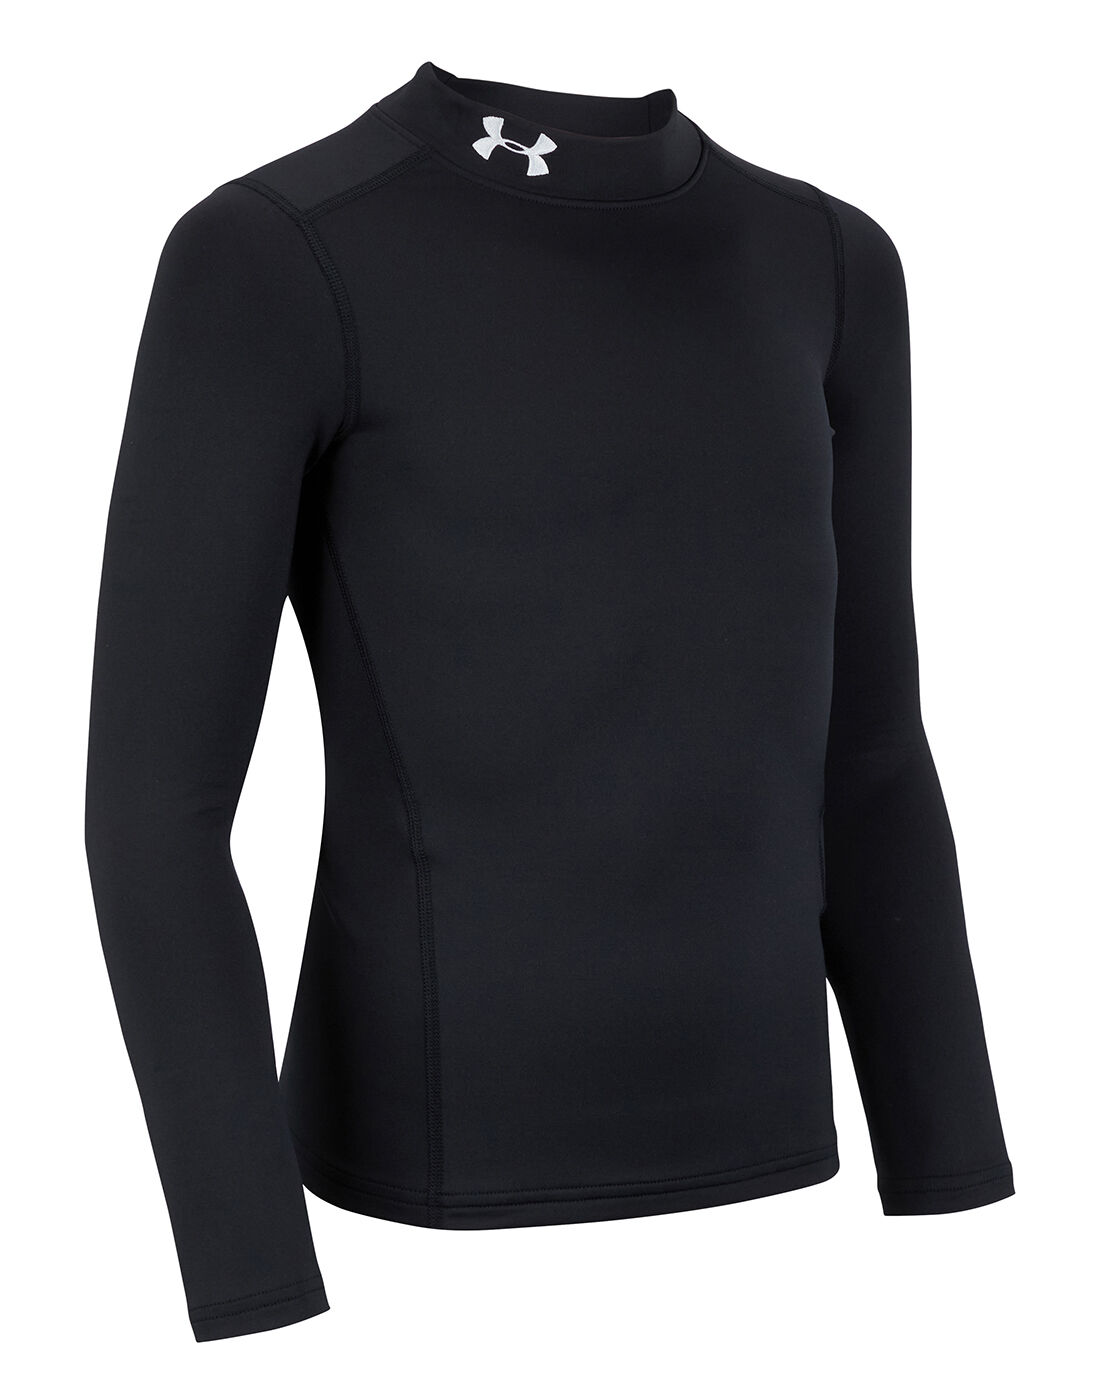 Kids Cold Gear Armour Base Layer Top 